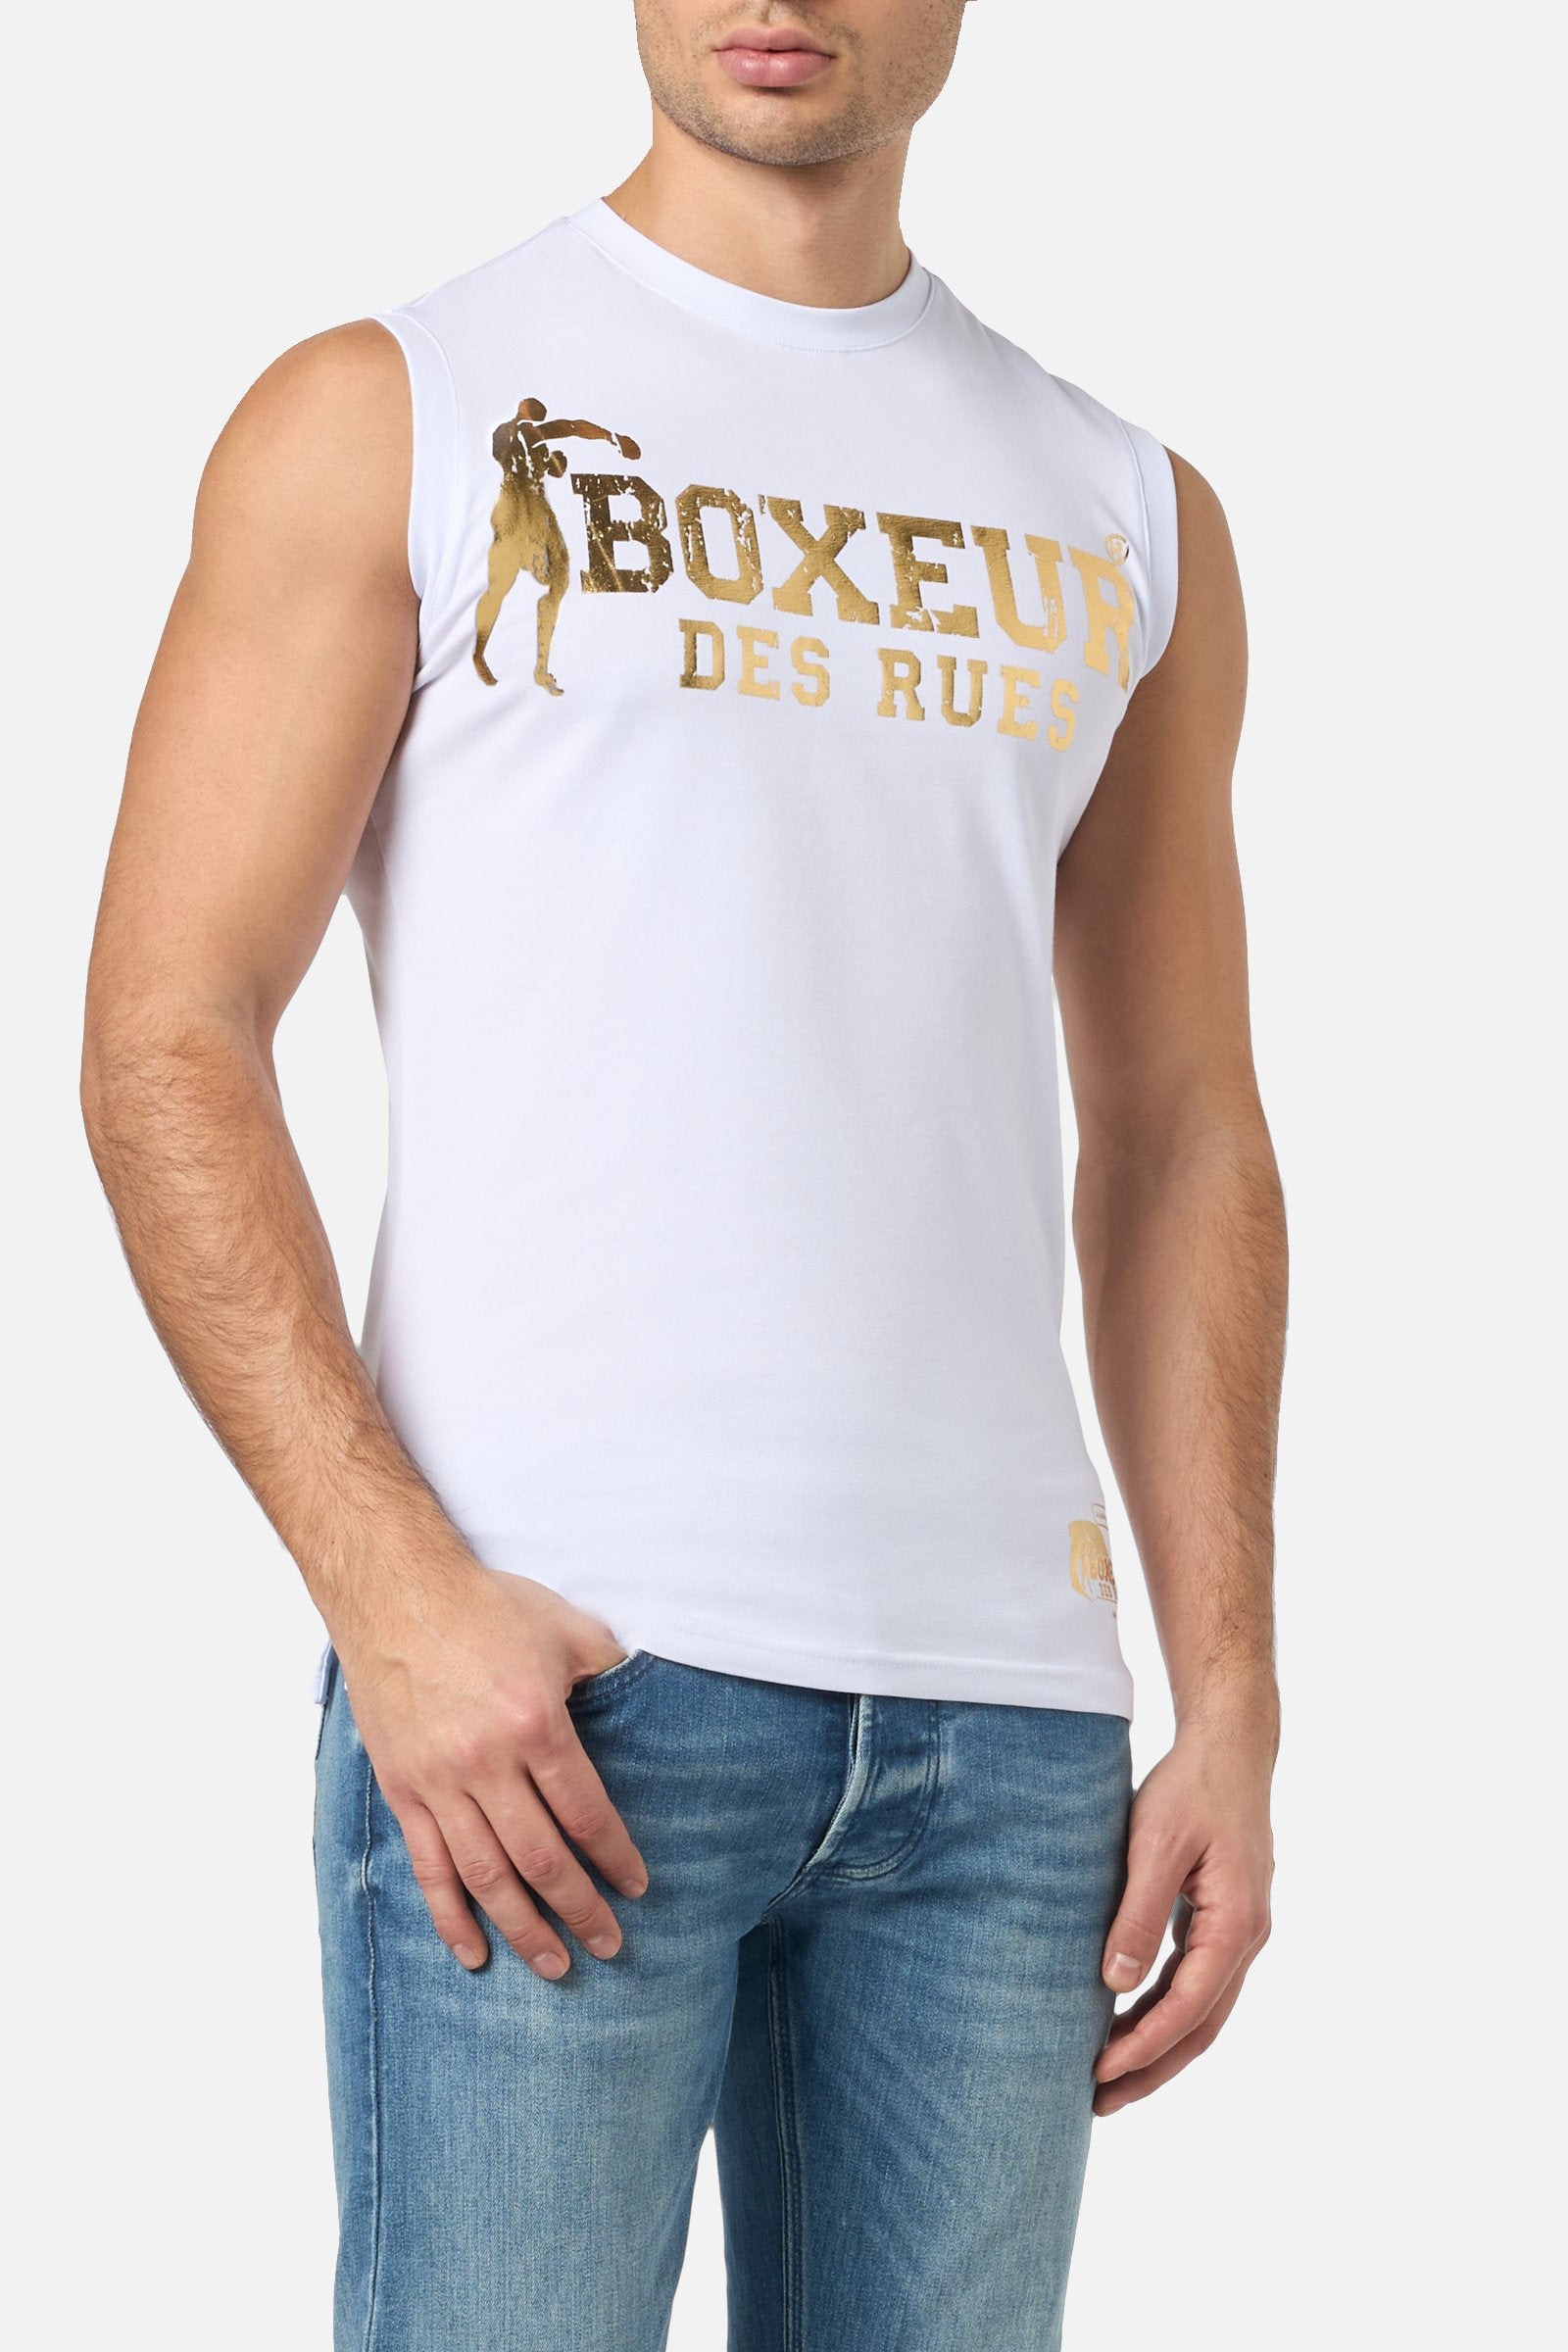 Basic Printed Tank Top in White-Gold Tops Boxeur des Rues   